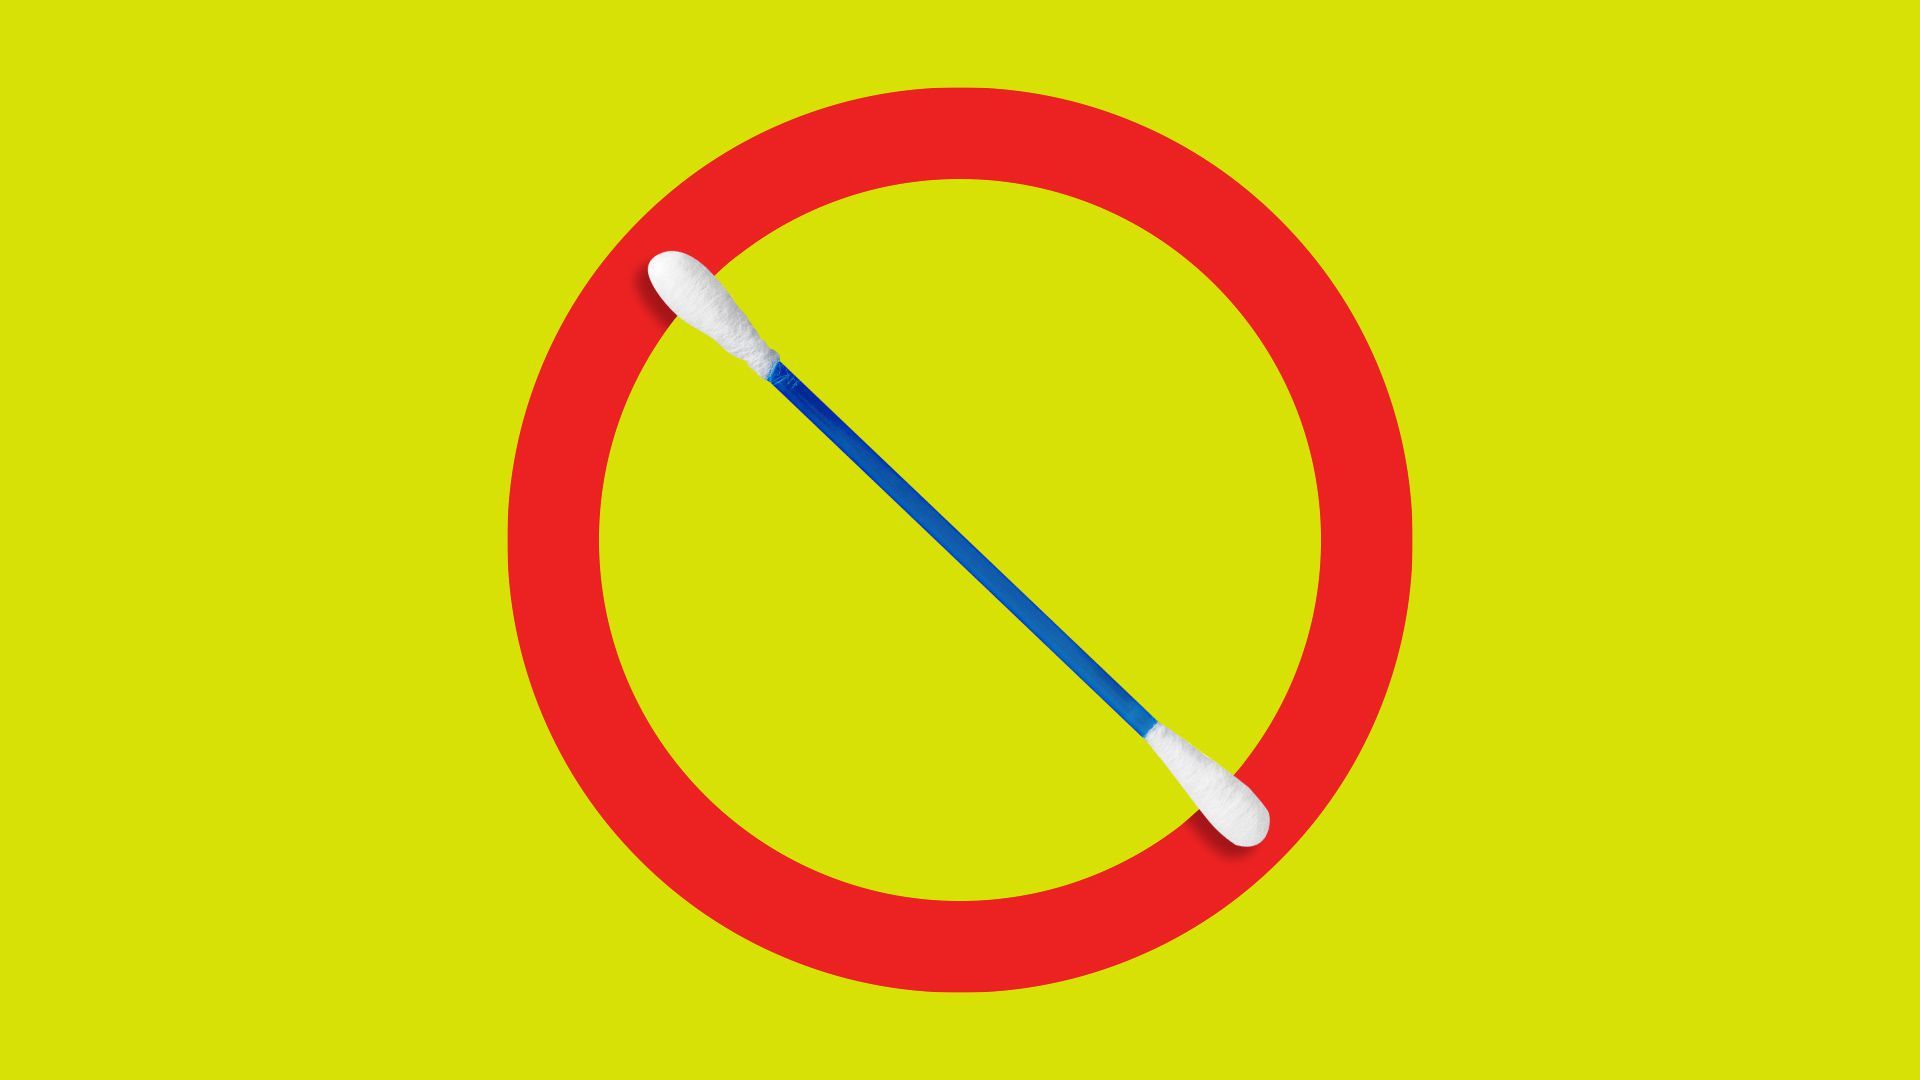 Illustration of a no symbol with a q-tip as the crossbar. 